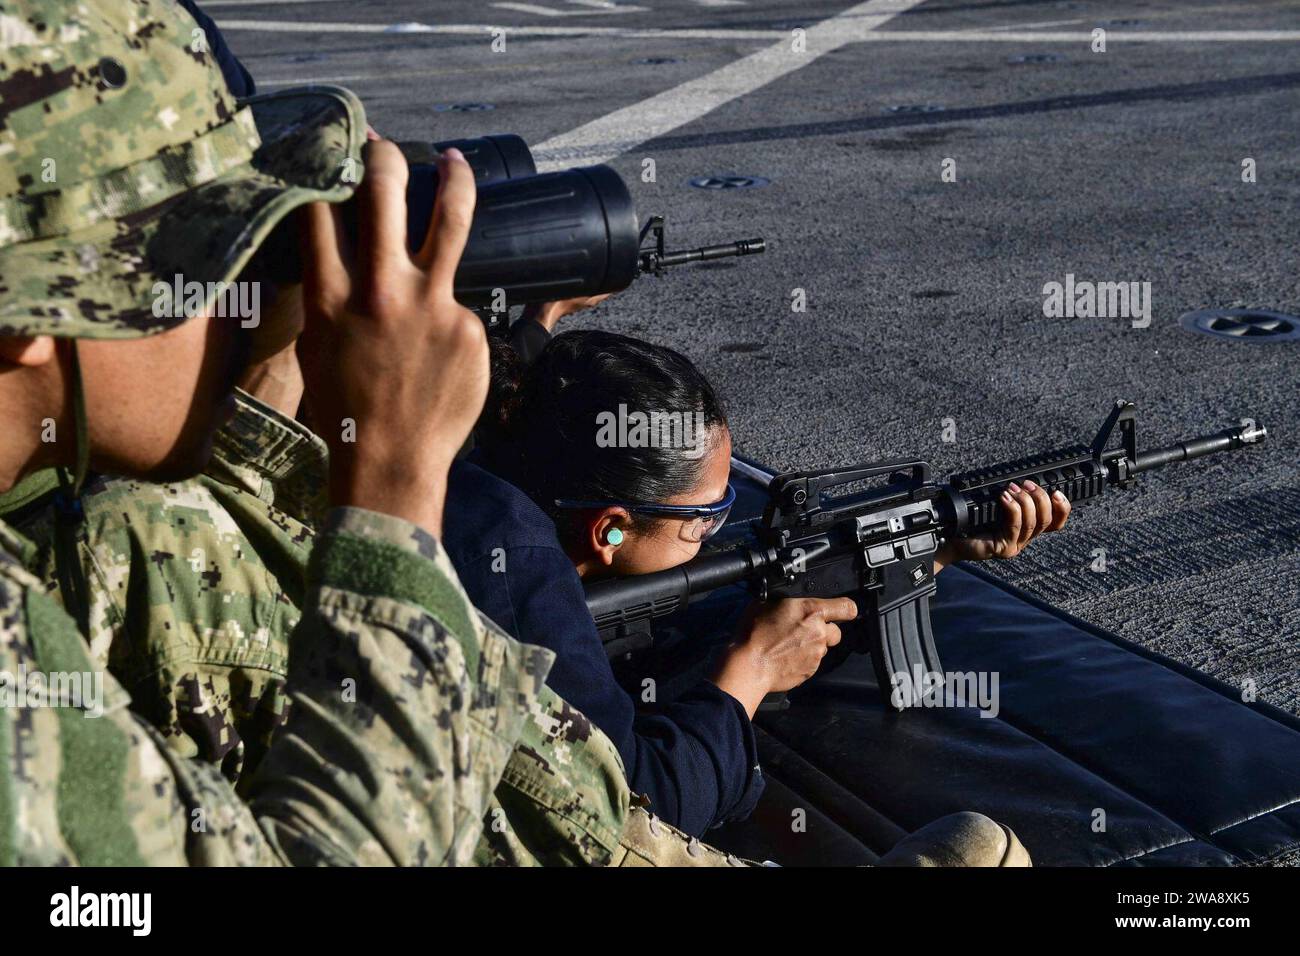 US military forces. 171108BK384-219 MEDITERRANEAN SEA (Nov. 8, 2017) Seaman Joanna Valdez, from Fontana, California, and assigned to the deck department aboard the San Antonio-class amphibious transport dock ship USS San Diego (LPD 22), fires an M4A1 Carbine during a live-fire training exercise on the ship’s flight deck Nov. 8, 2017. San Diego is deployed with the America Amphibious Ready Group and the 15th Marine Expeditionary Unit to support maritime security and theater security cooperation in efforts in the U.S. 6th Fleet area of operations. (U.S. Navy photo by Mass Communication Specialis Stock Photo